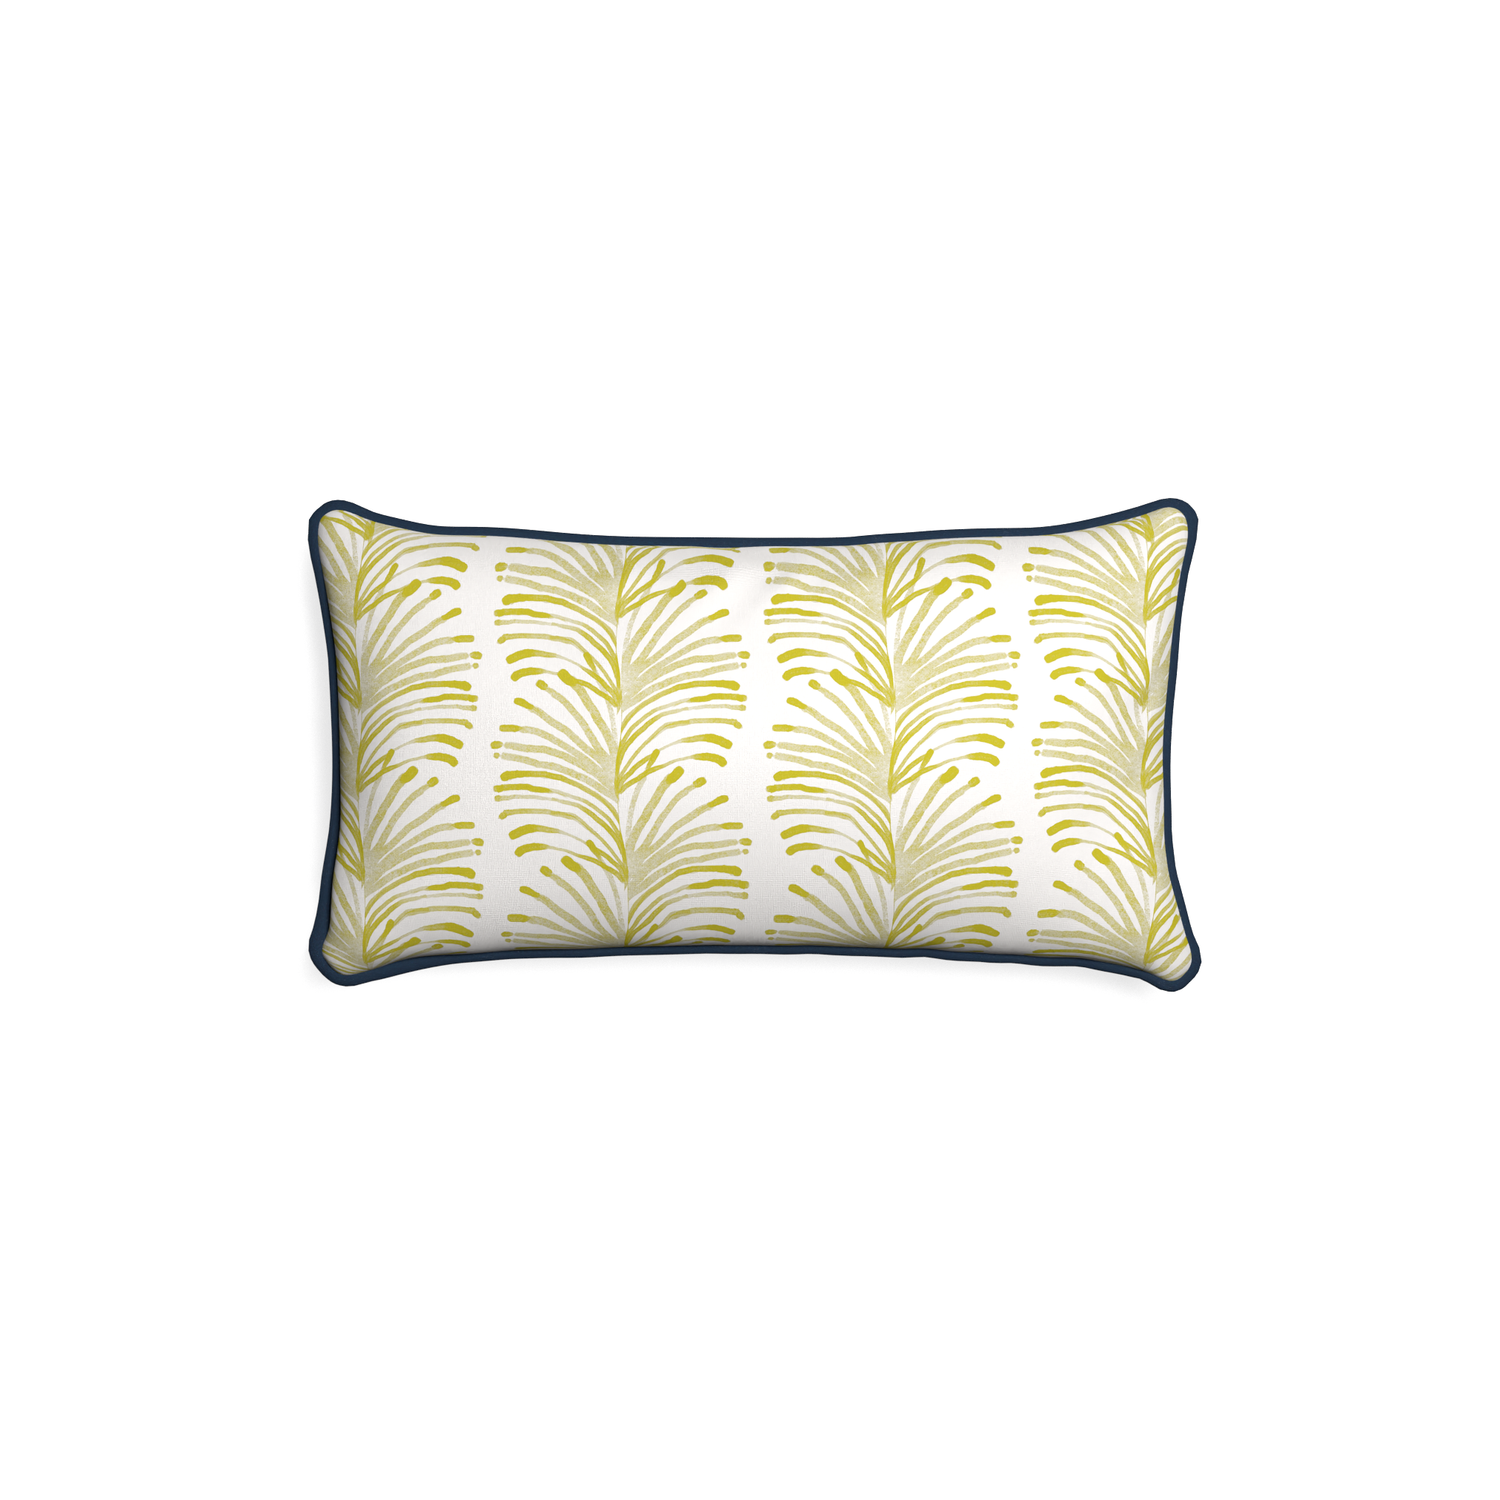 Petite-lumbar emma chartreuse custom yellow stripe chartreusepillow with c piping on white background